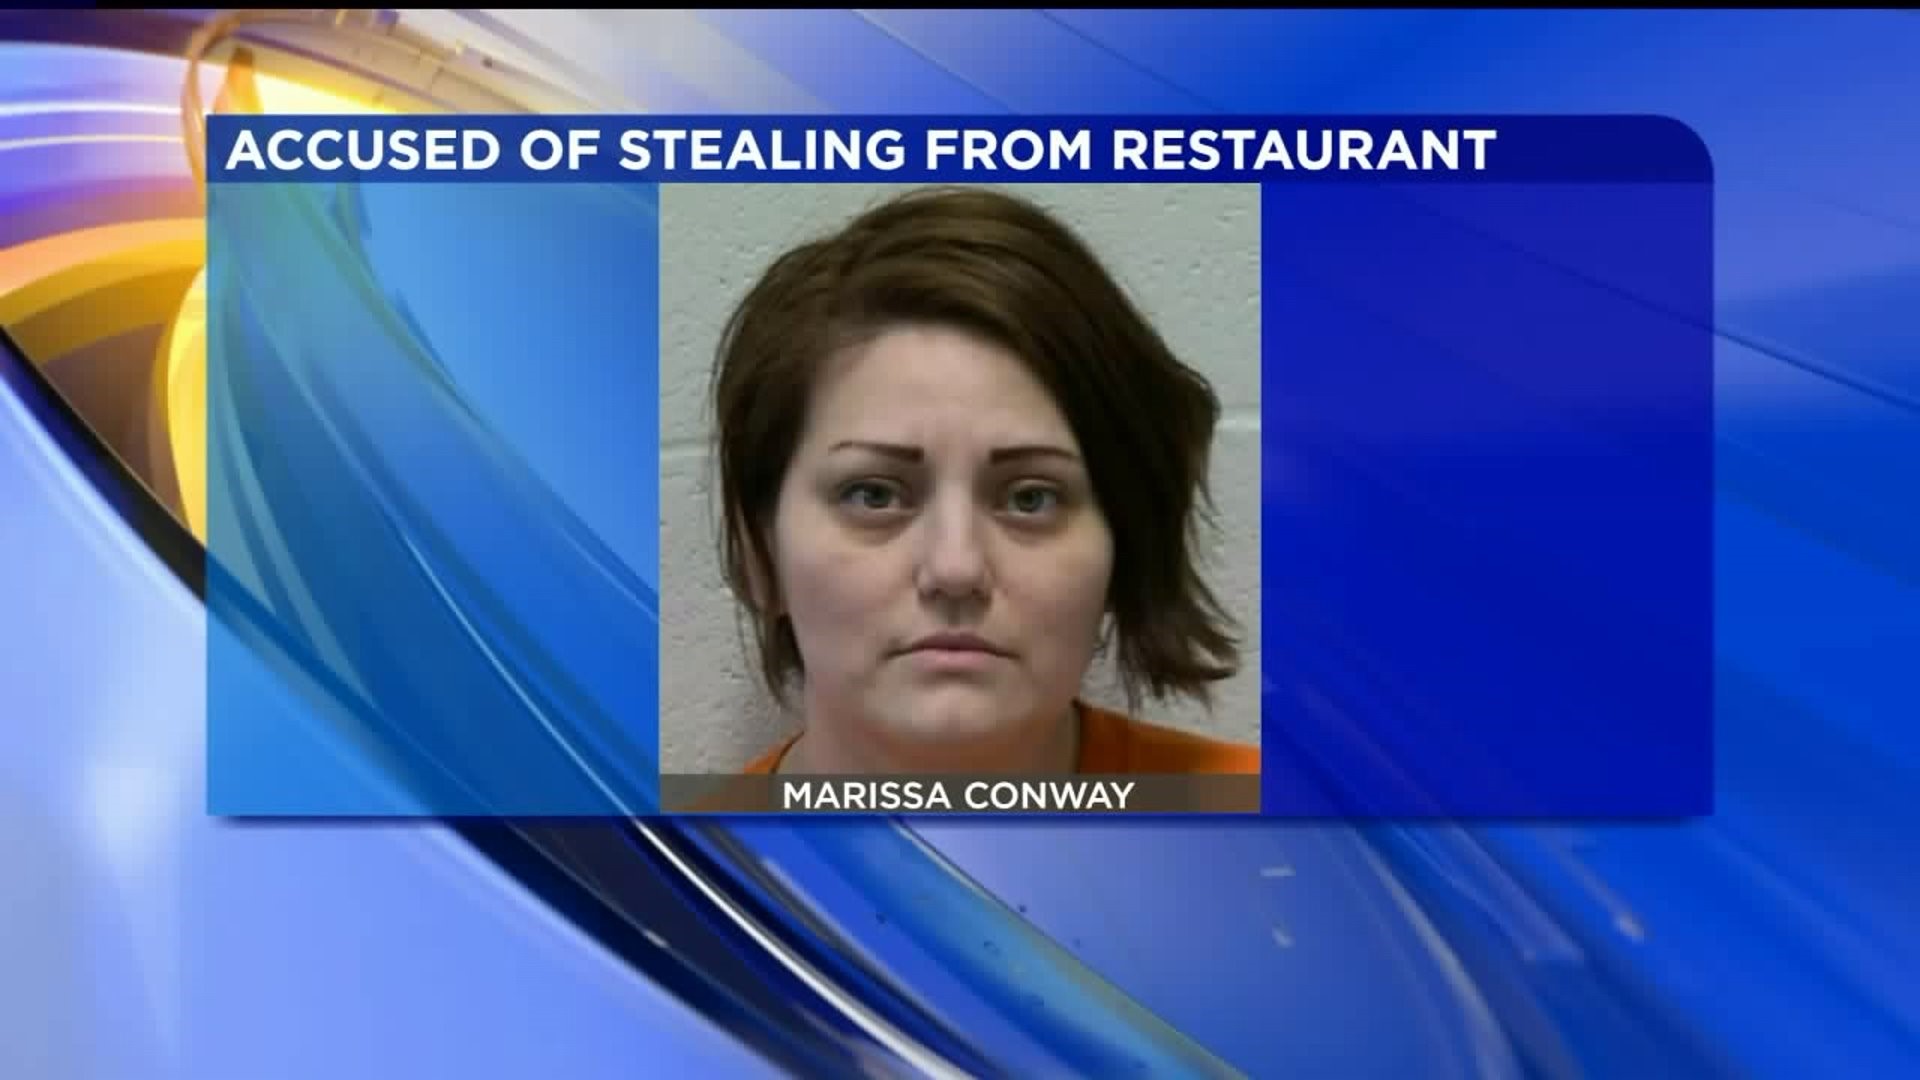 Restaurant Manager Charged with Theft